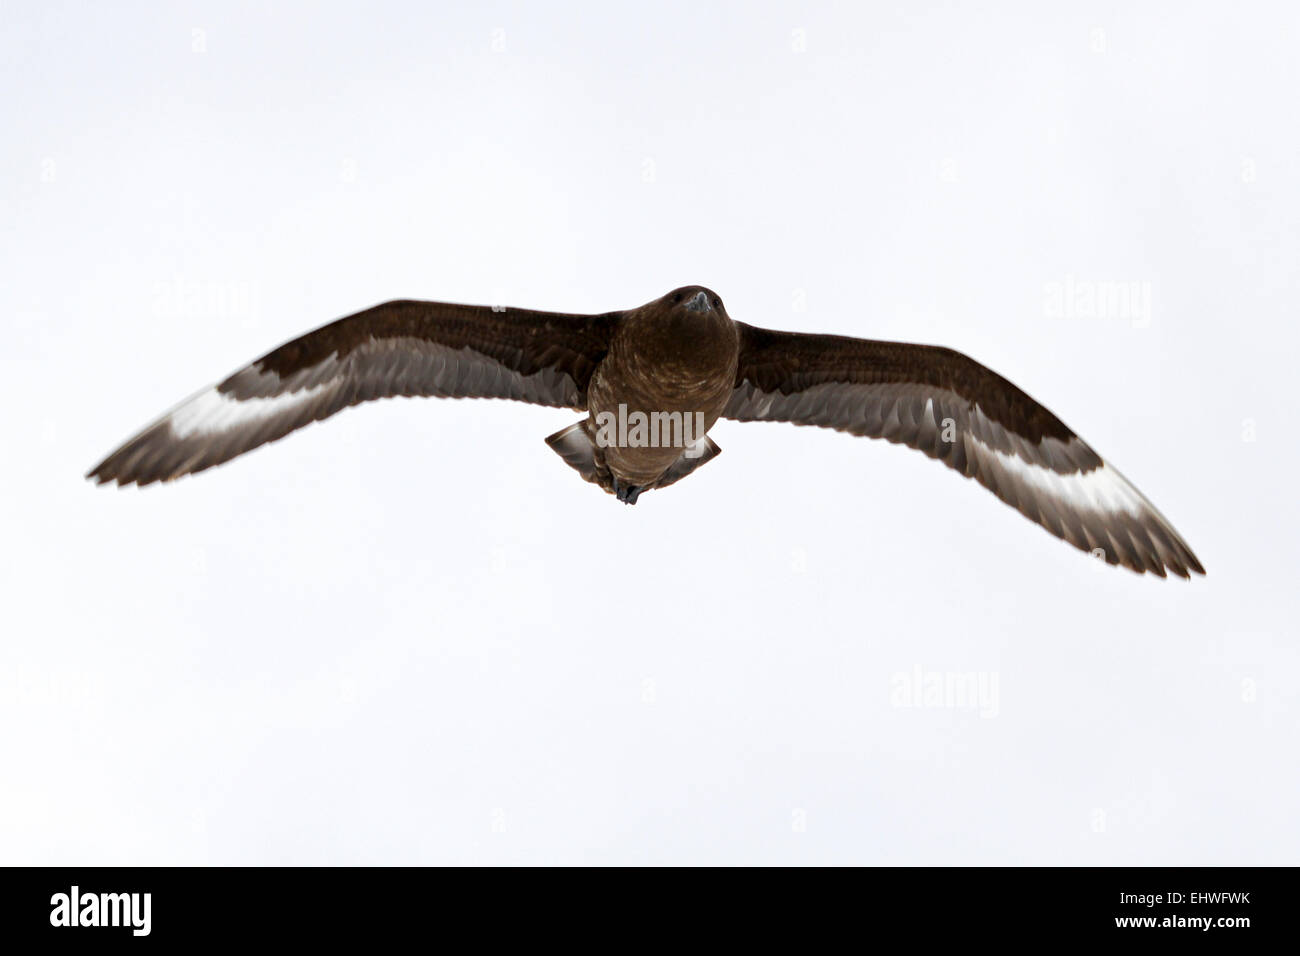 Southern giant petrel (Macronectes giganteus) in flight. This large bird is native to Antarctica and the southern hemisphere reg Stock Photo